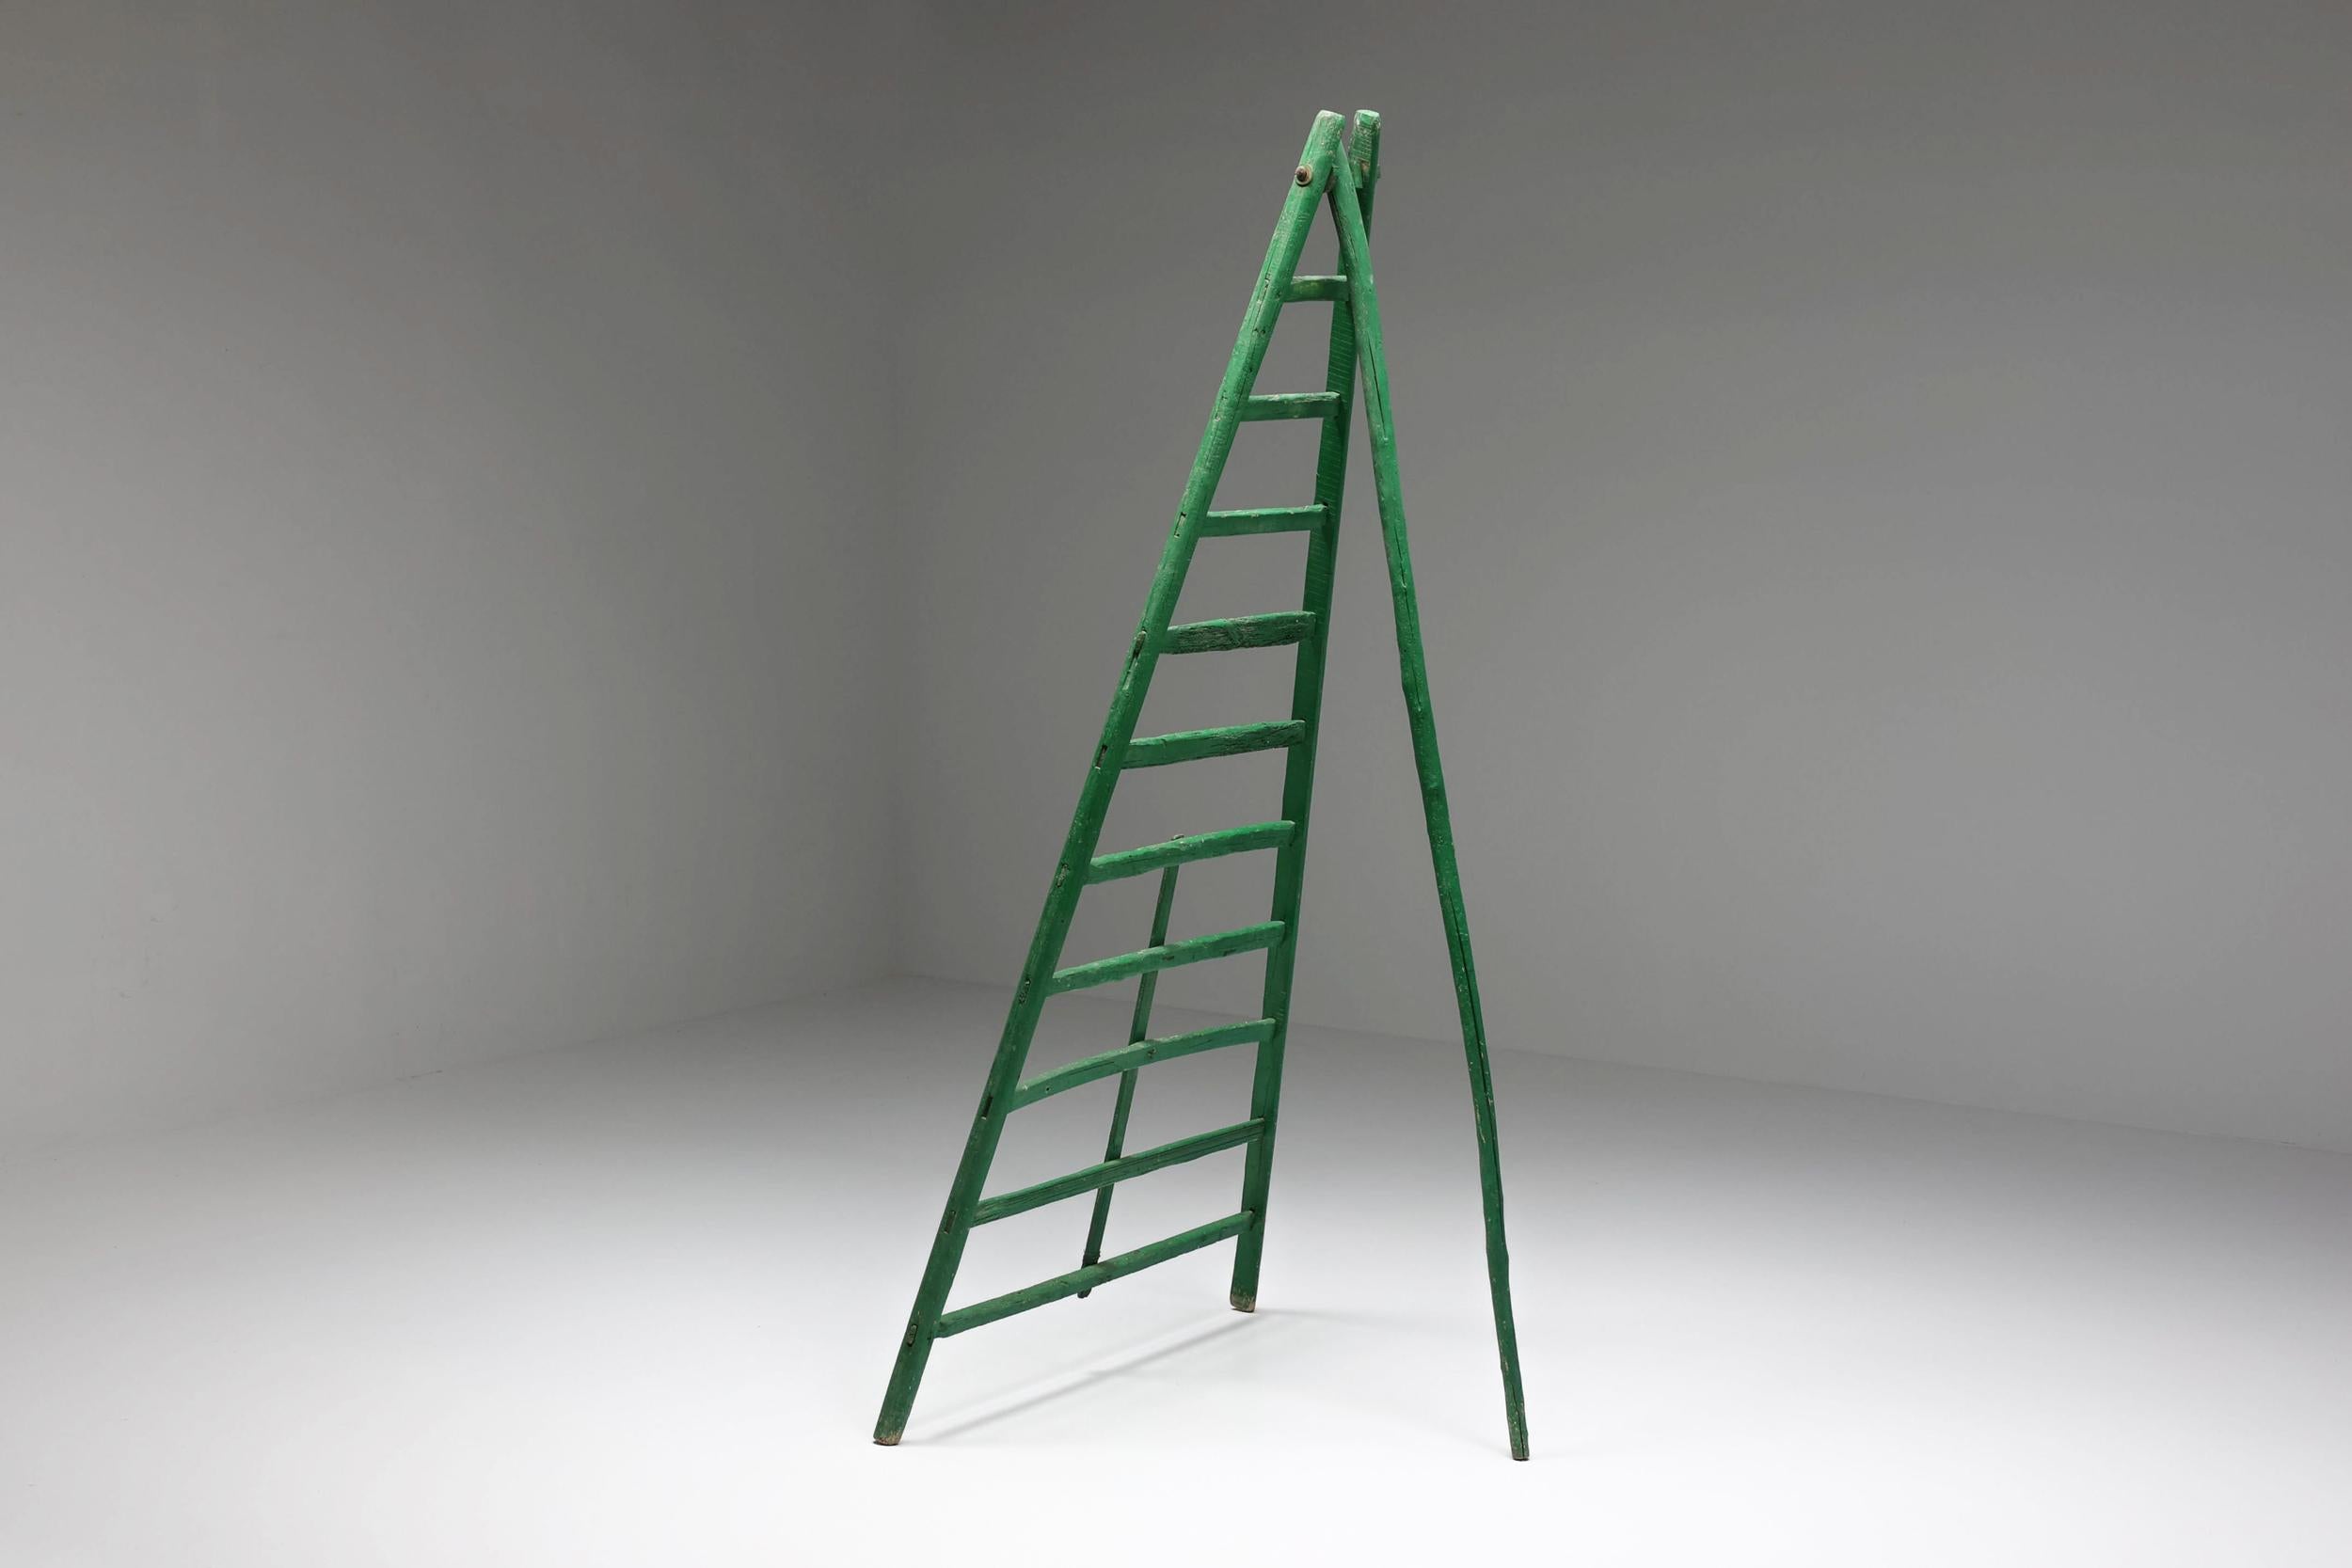 French Figurative Sculpture, Objet Trouvé Green Fruit Picking Ladder, Rustic, 1890's